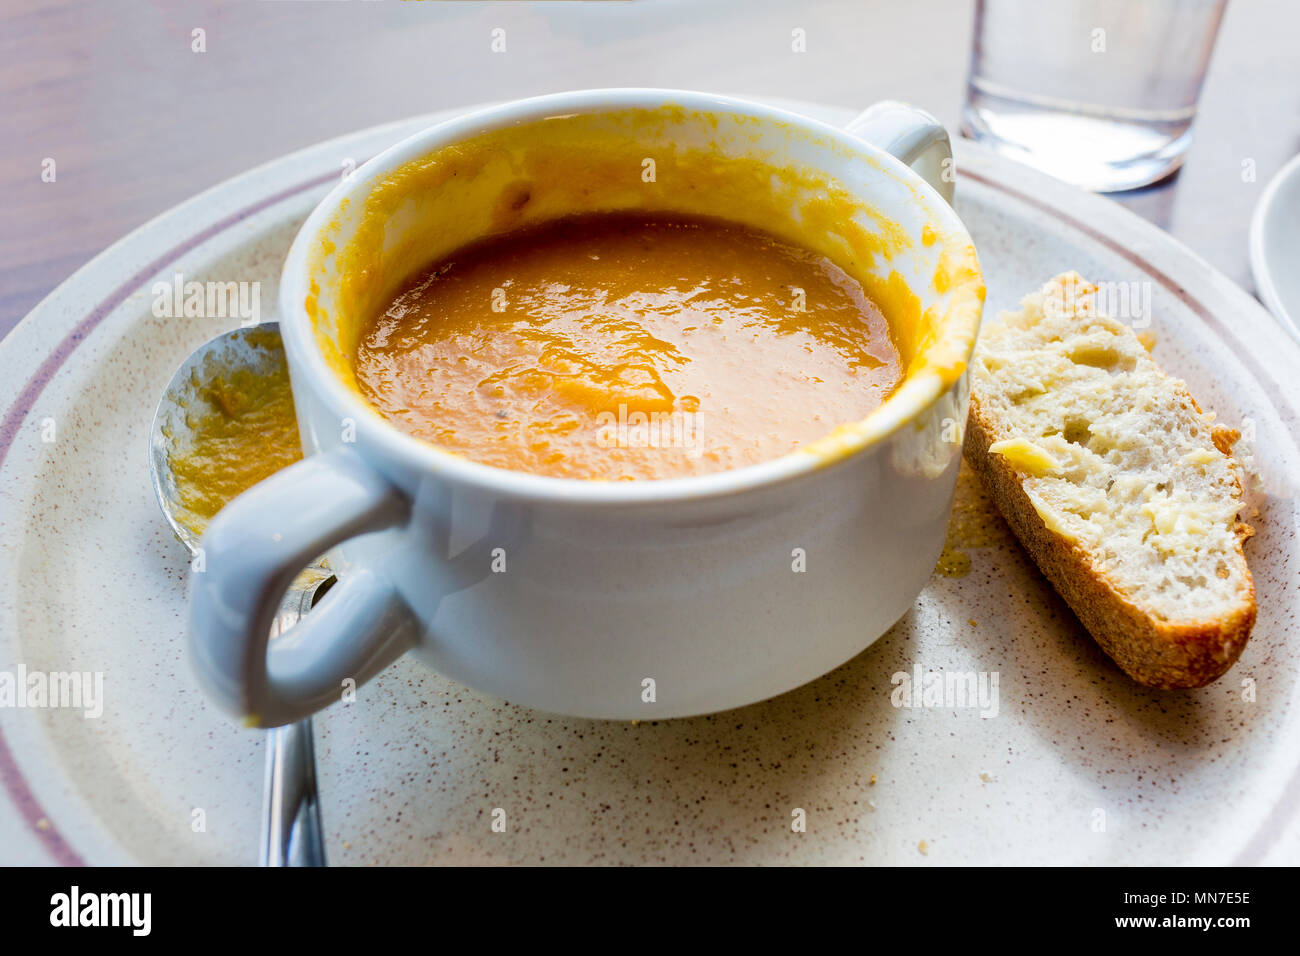 Half eaten bowl of vegetable soup with bread and spoon on cafe counter Stock Photo